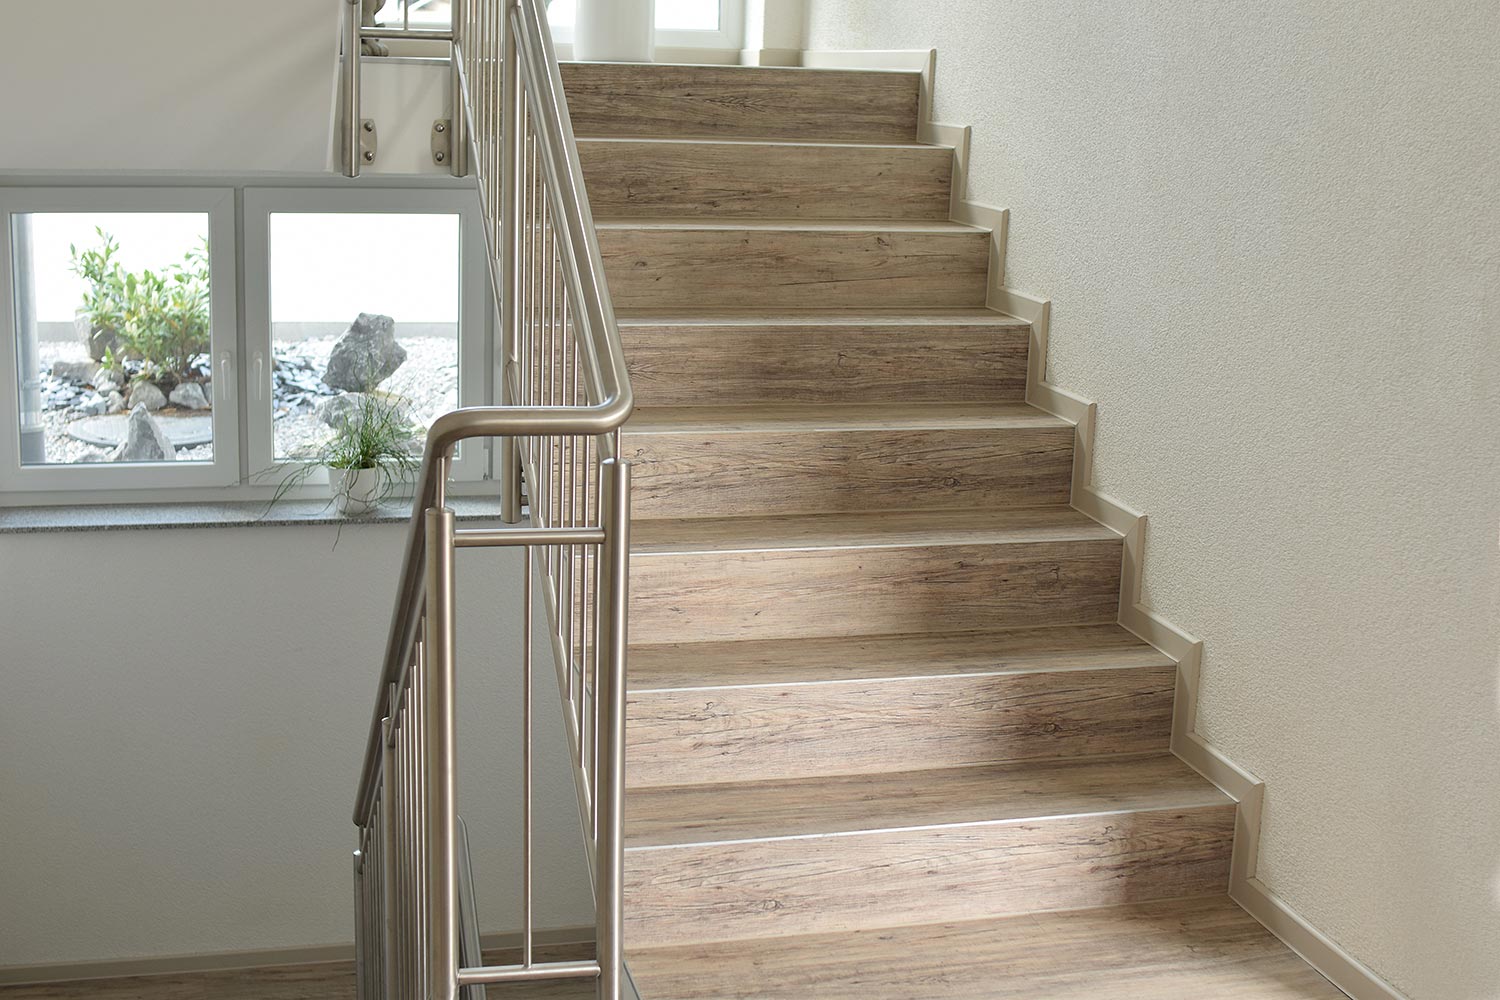 Modern staircase and stainless steel handrail